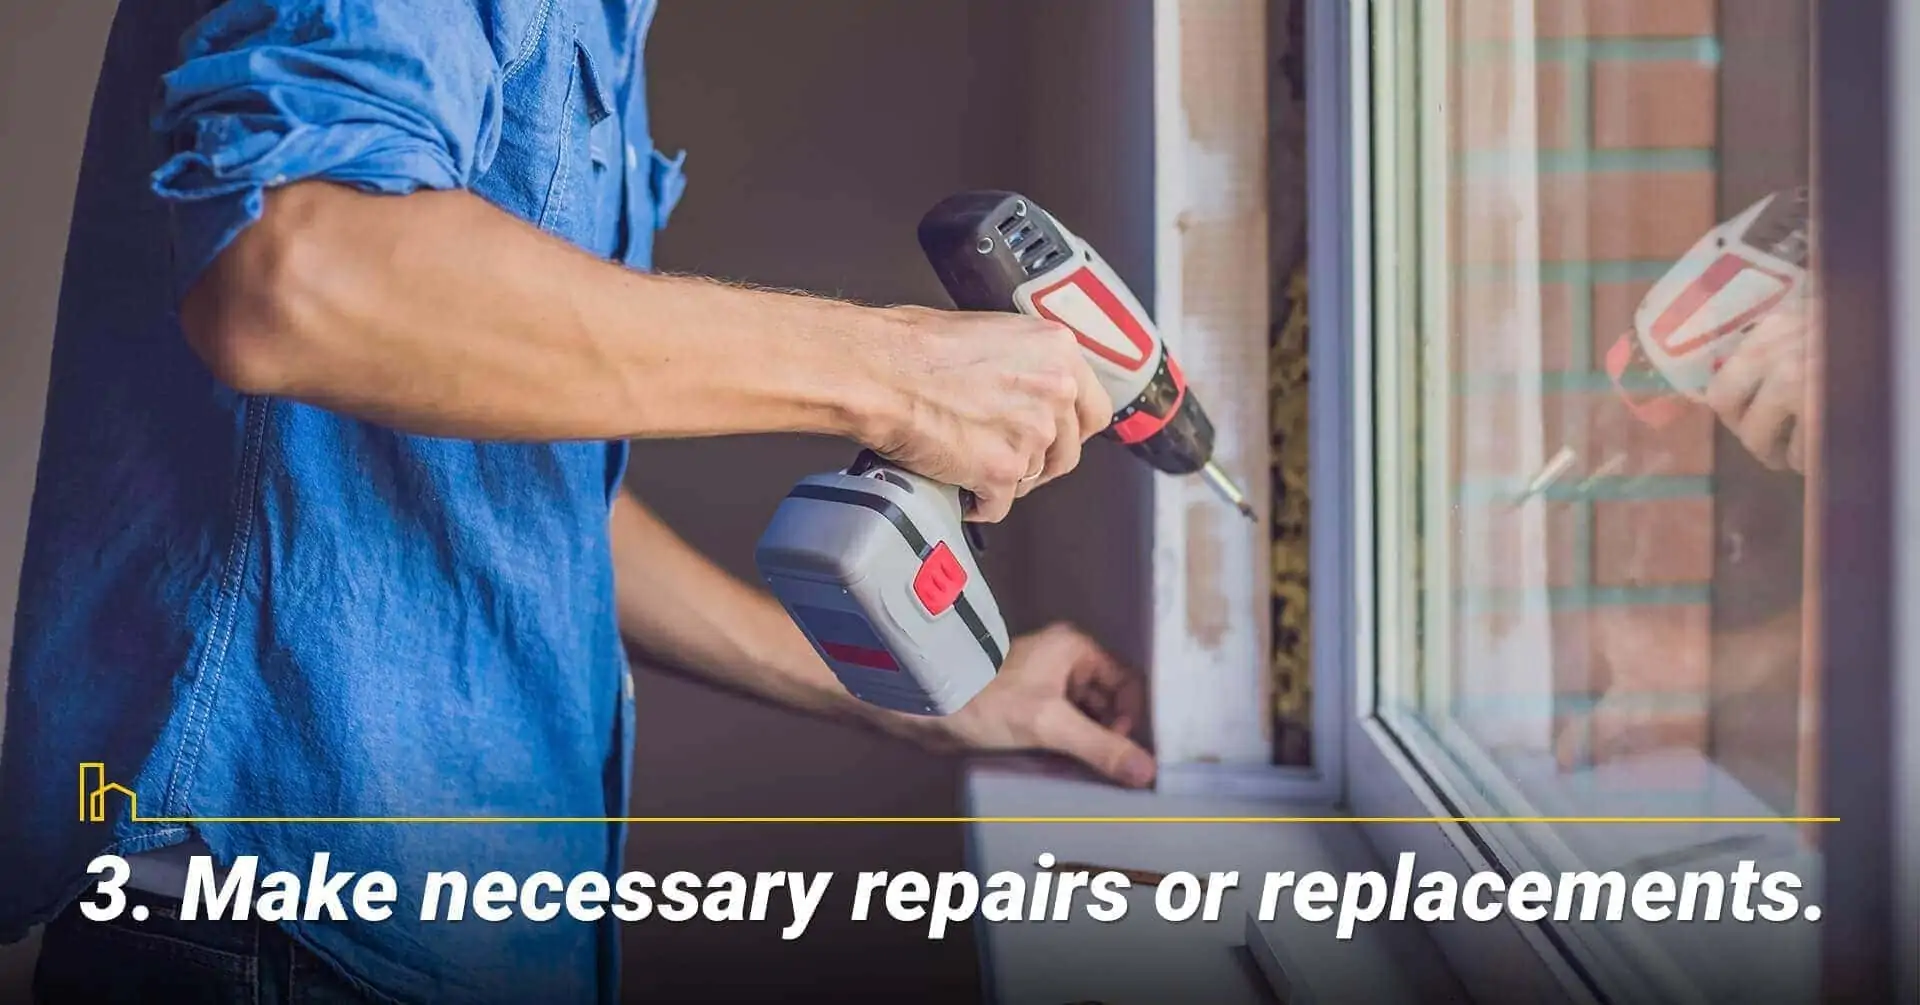 Make necessary repairs or replacements, maintain your house